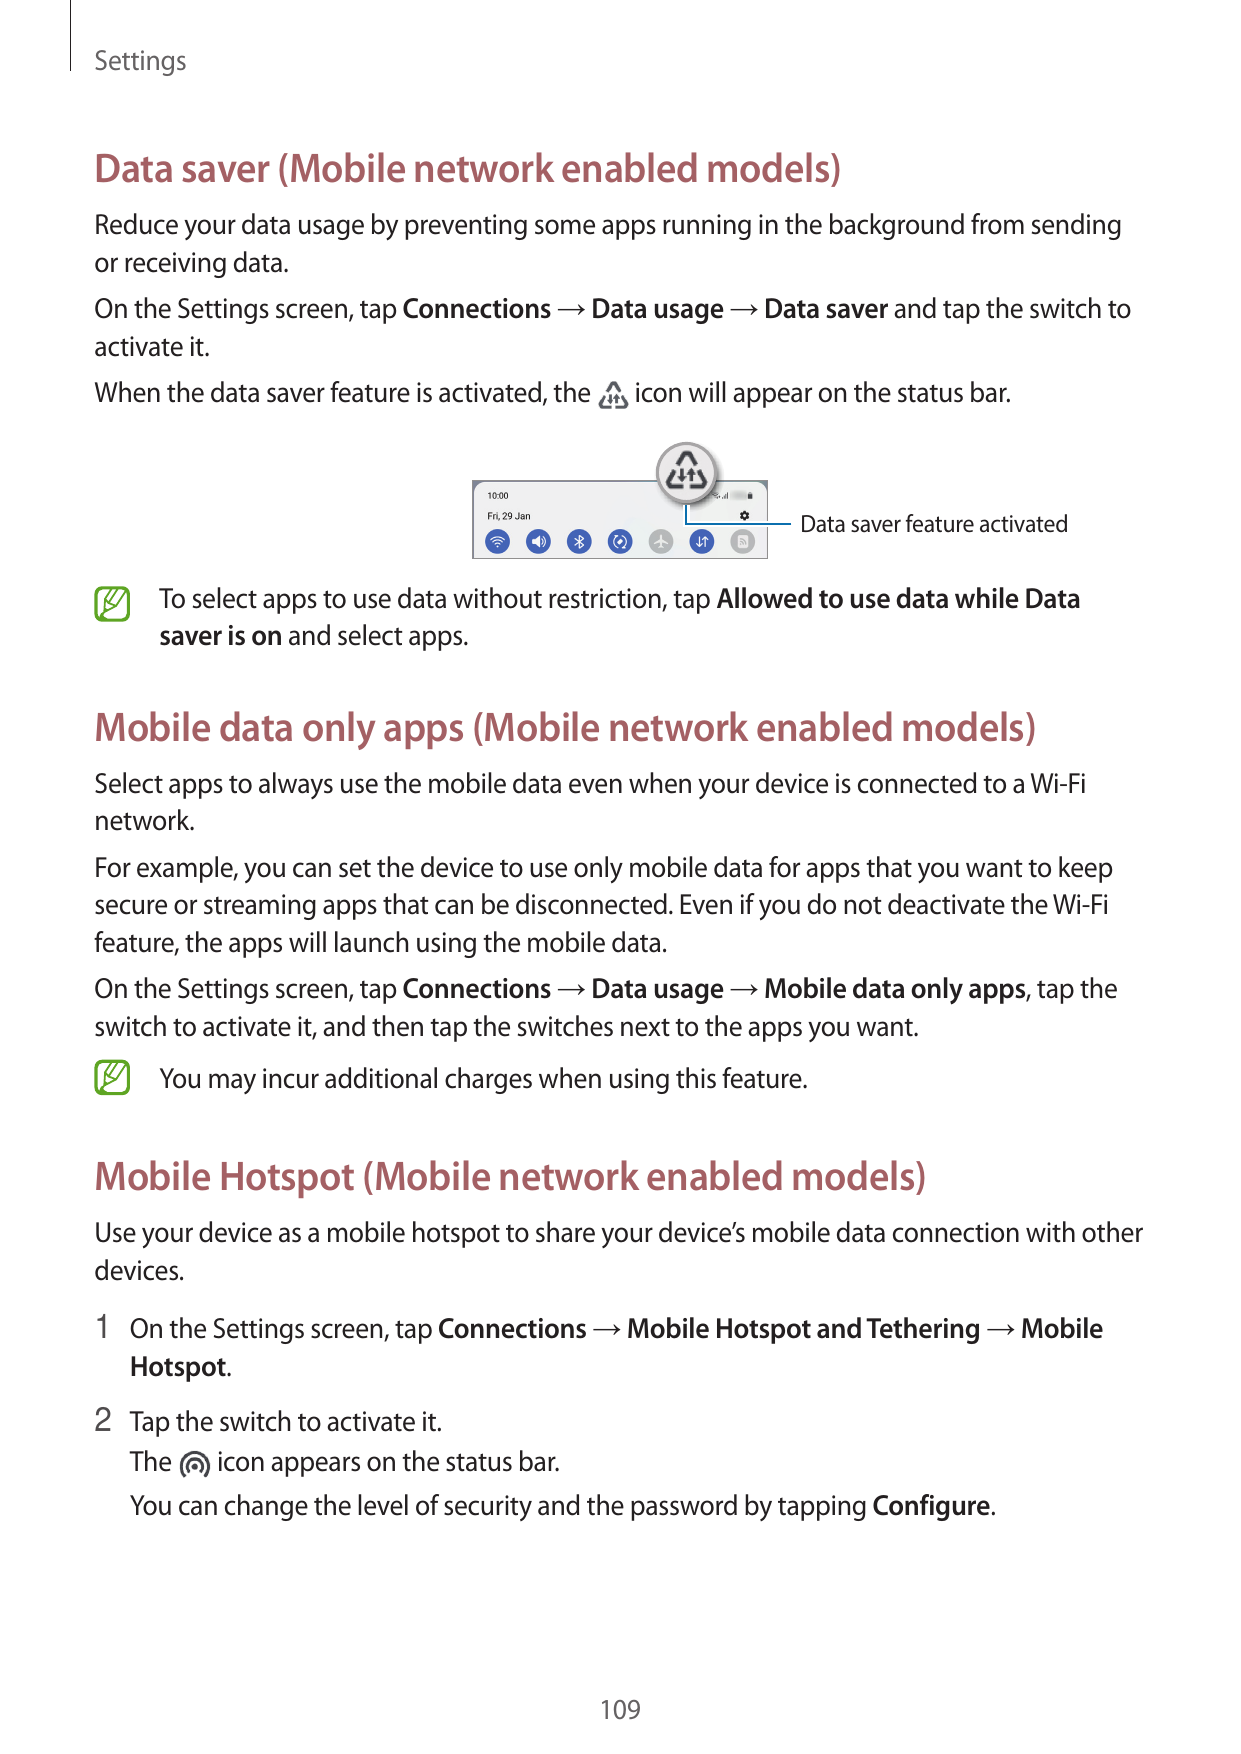 SettingsData saver (Mobile network enabled models)Reduce your data usage by preventing some apps running in the background from 